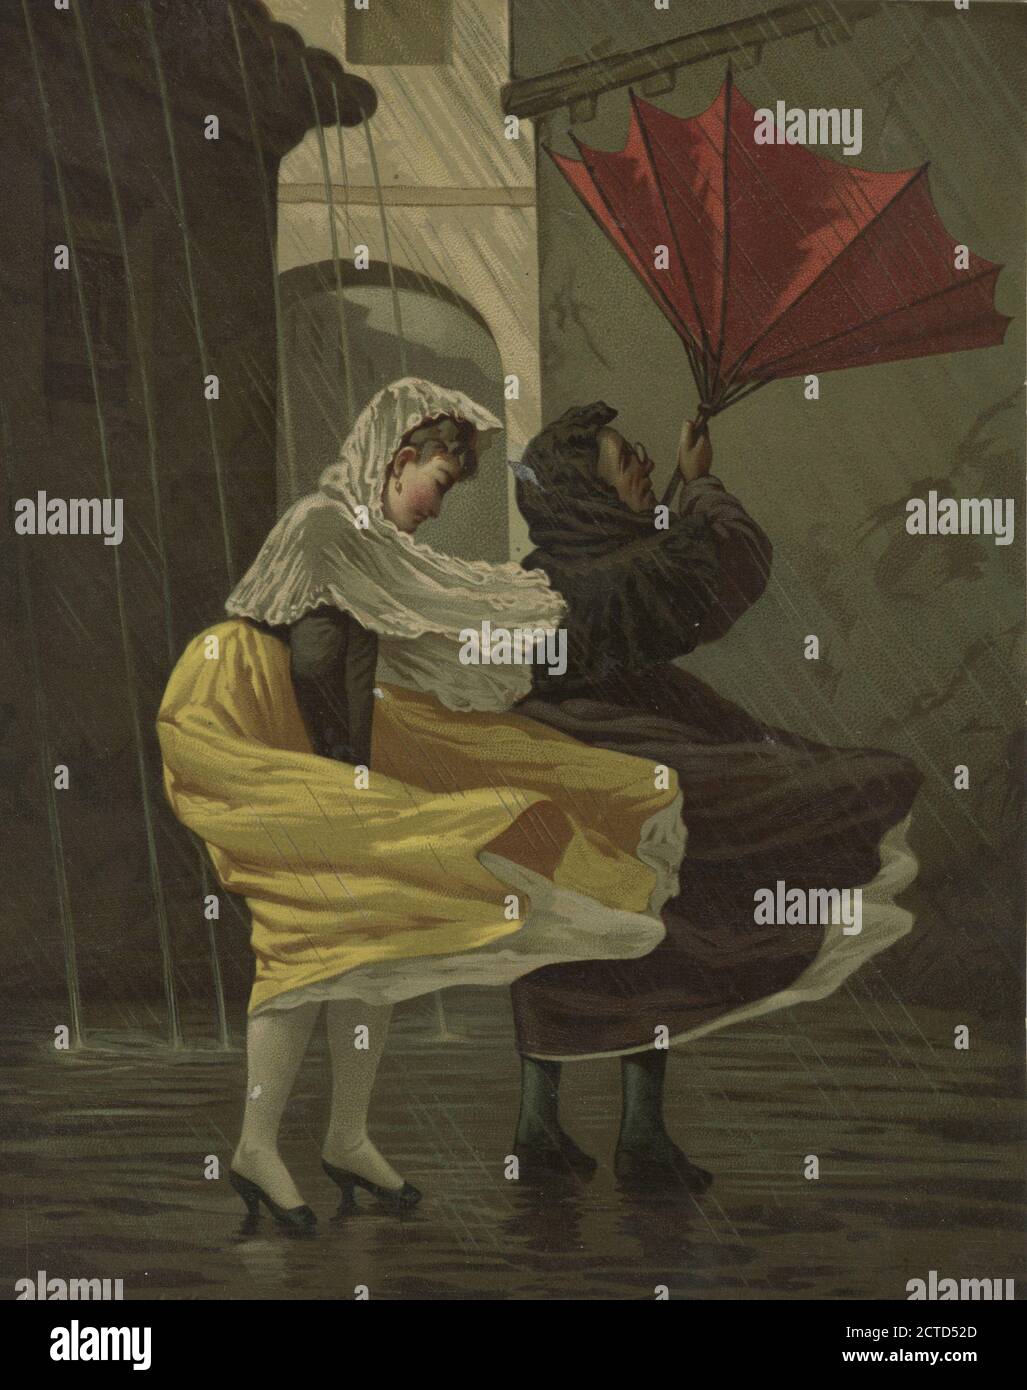 A print depicting women in a windy rainstorm with an umbrella blown inside out., still image, c1876-1890 - 1875 Stock Photo